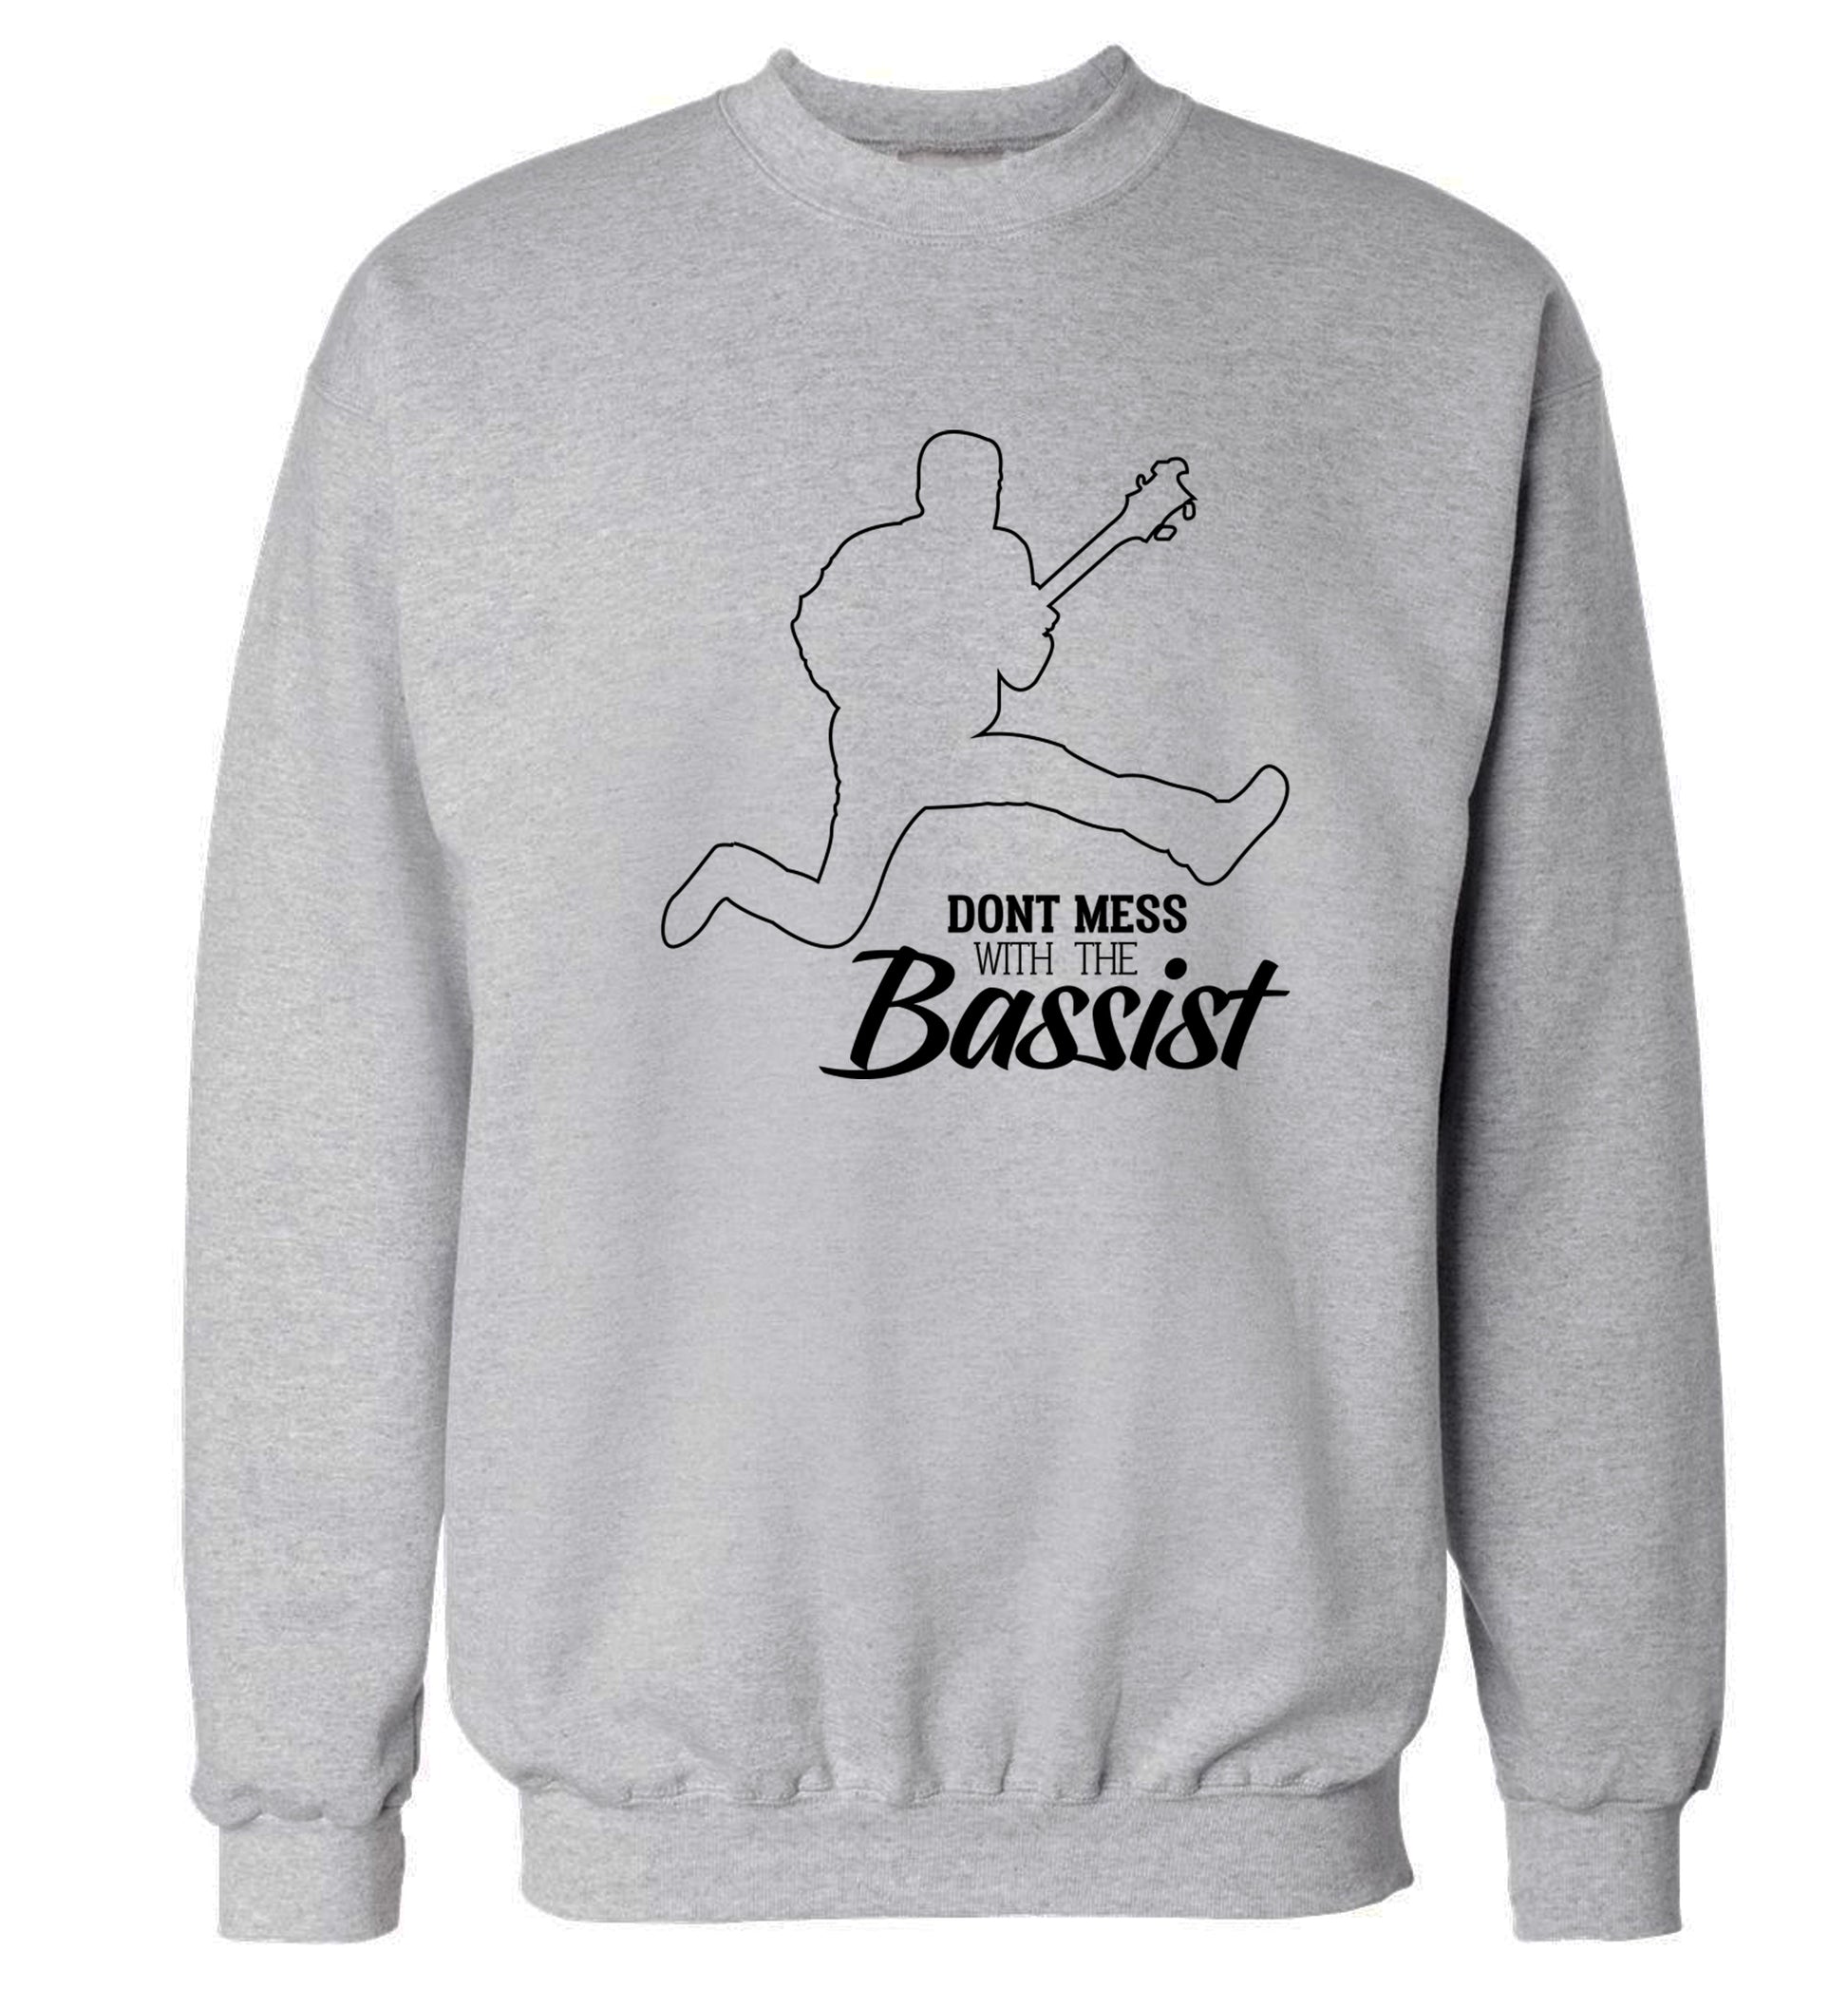 Dont mess with the bassist Adult's unisex grey Sweater 2XL